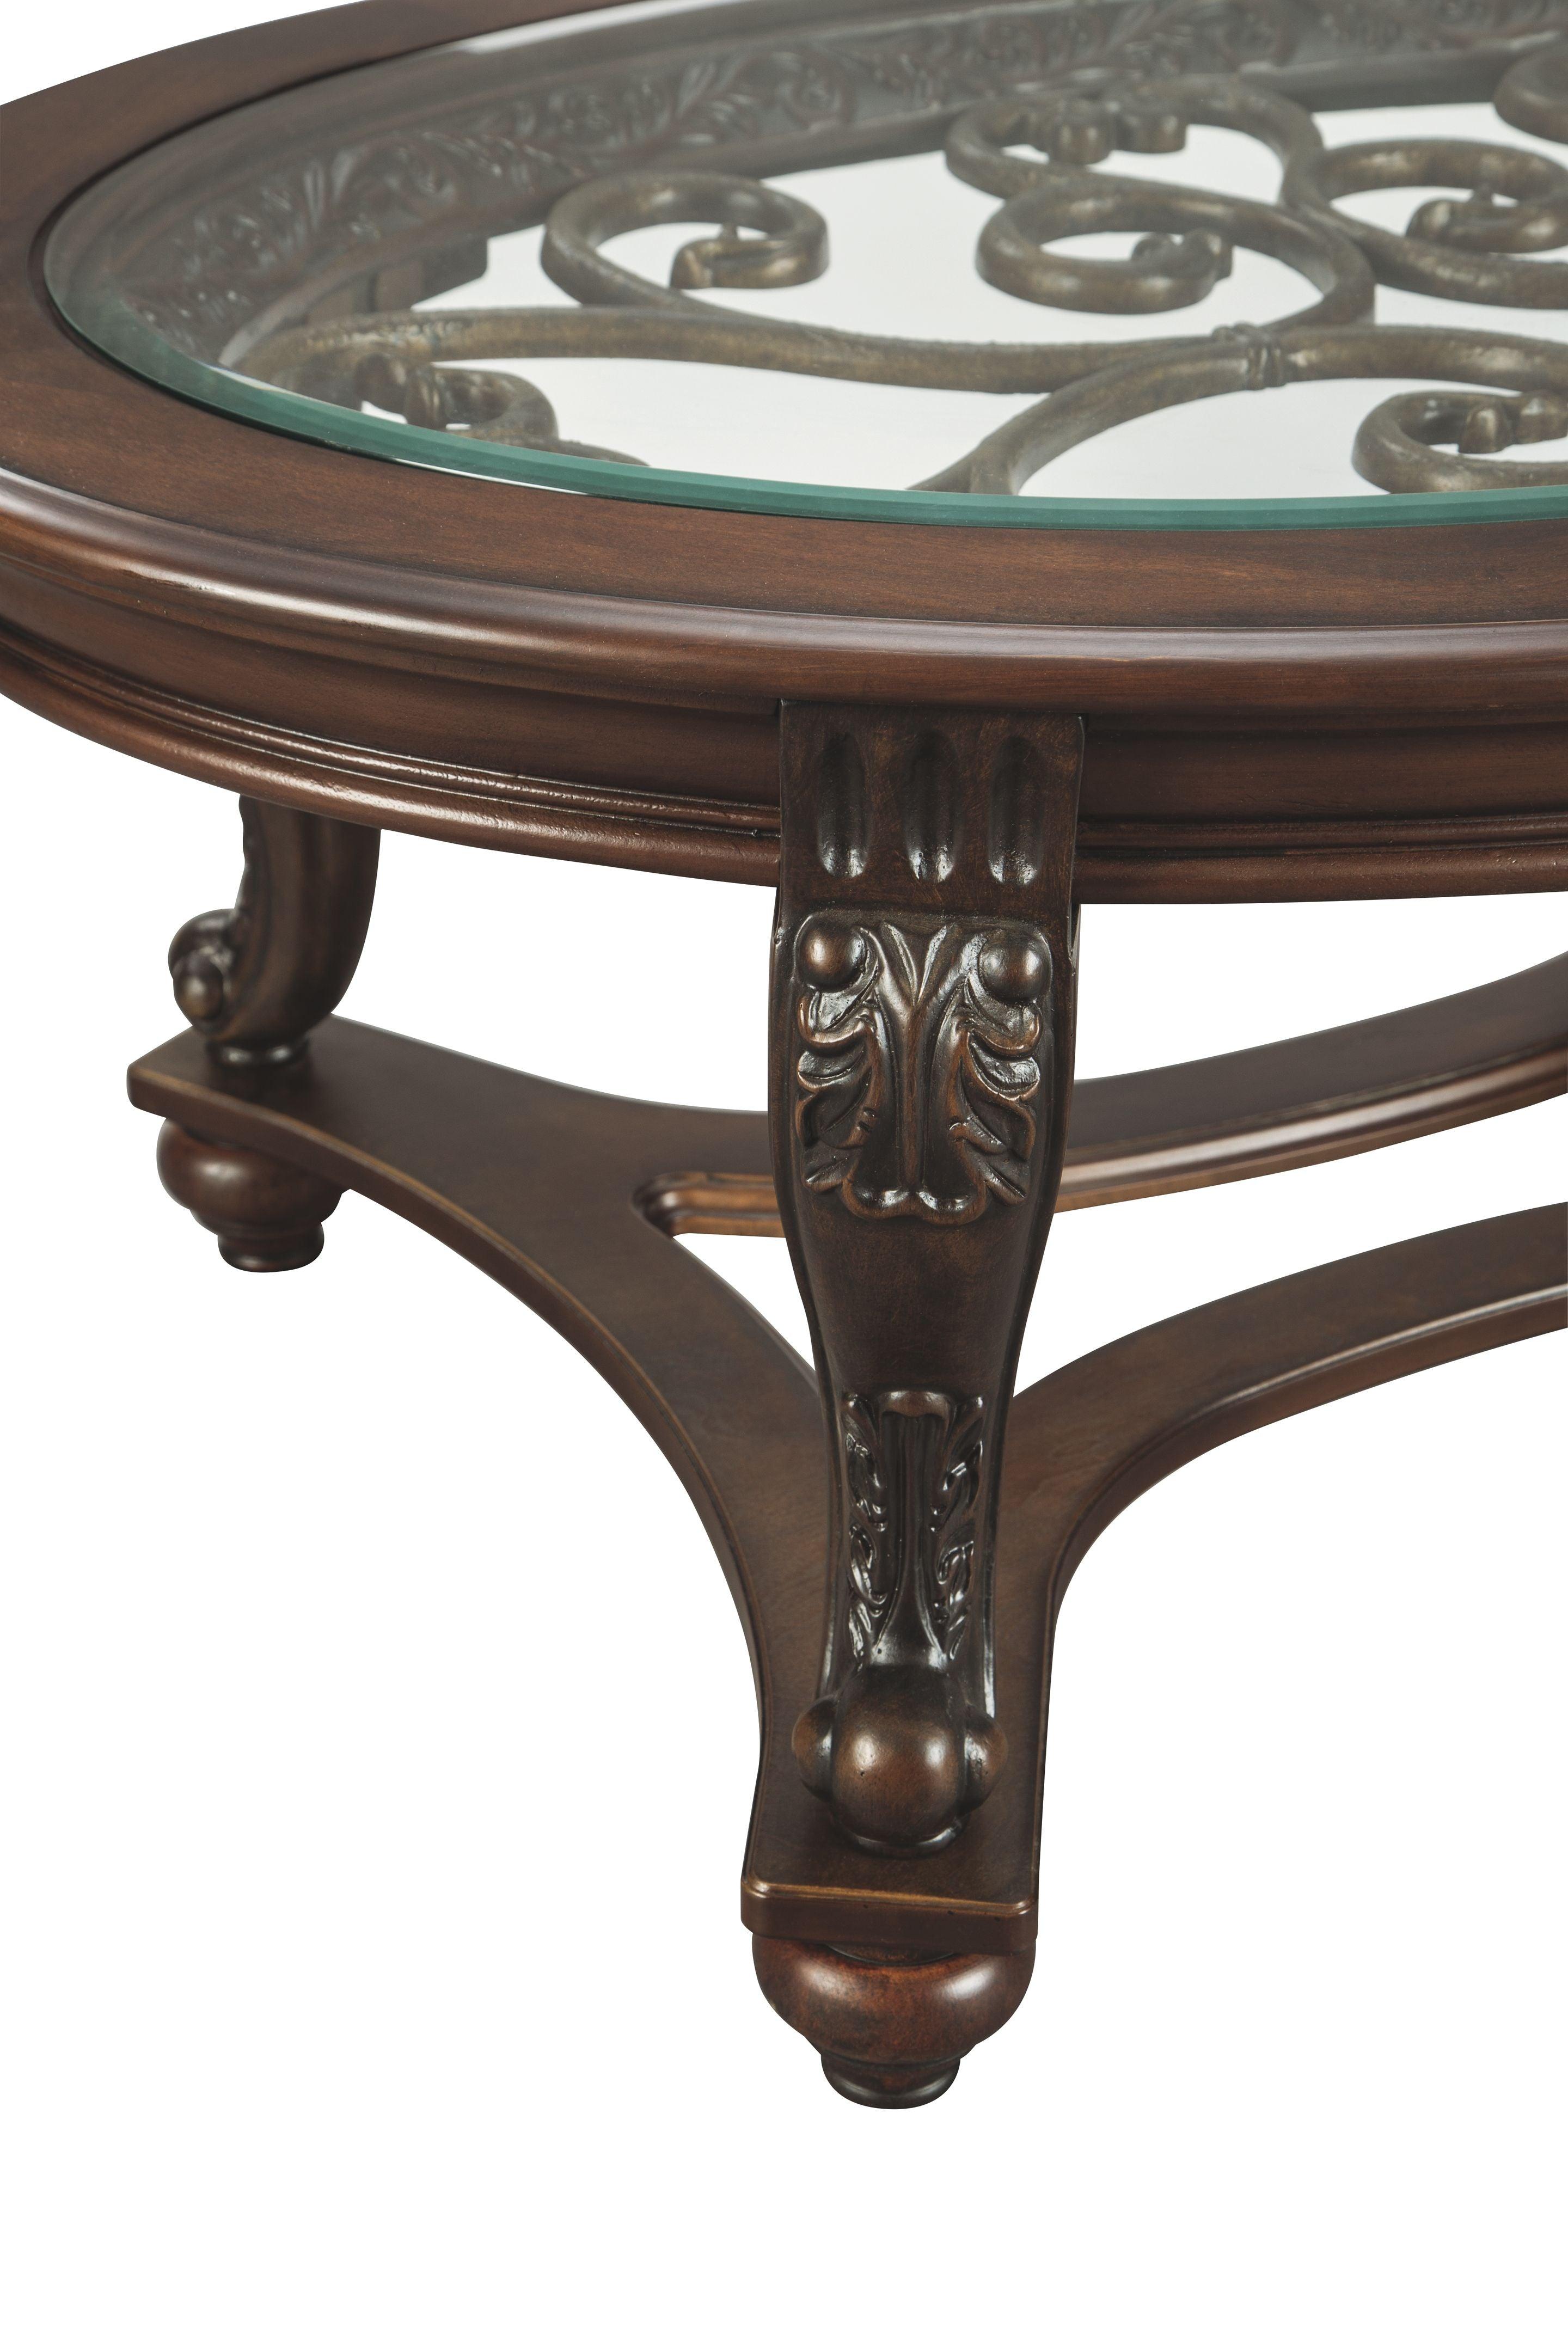 Ashley Furniture - Norcastle - Dark Brown - Oval Cocktail Table - 5th Avenue Furniture